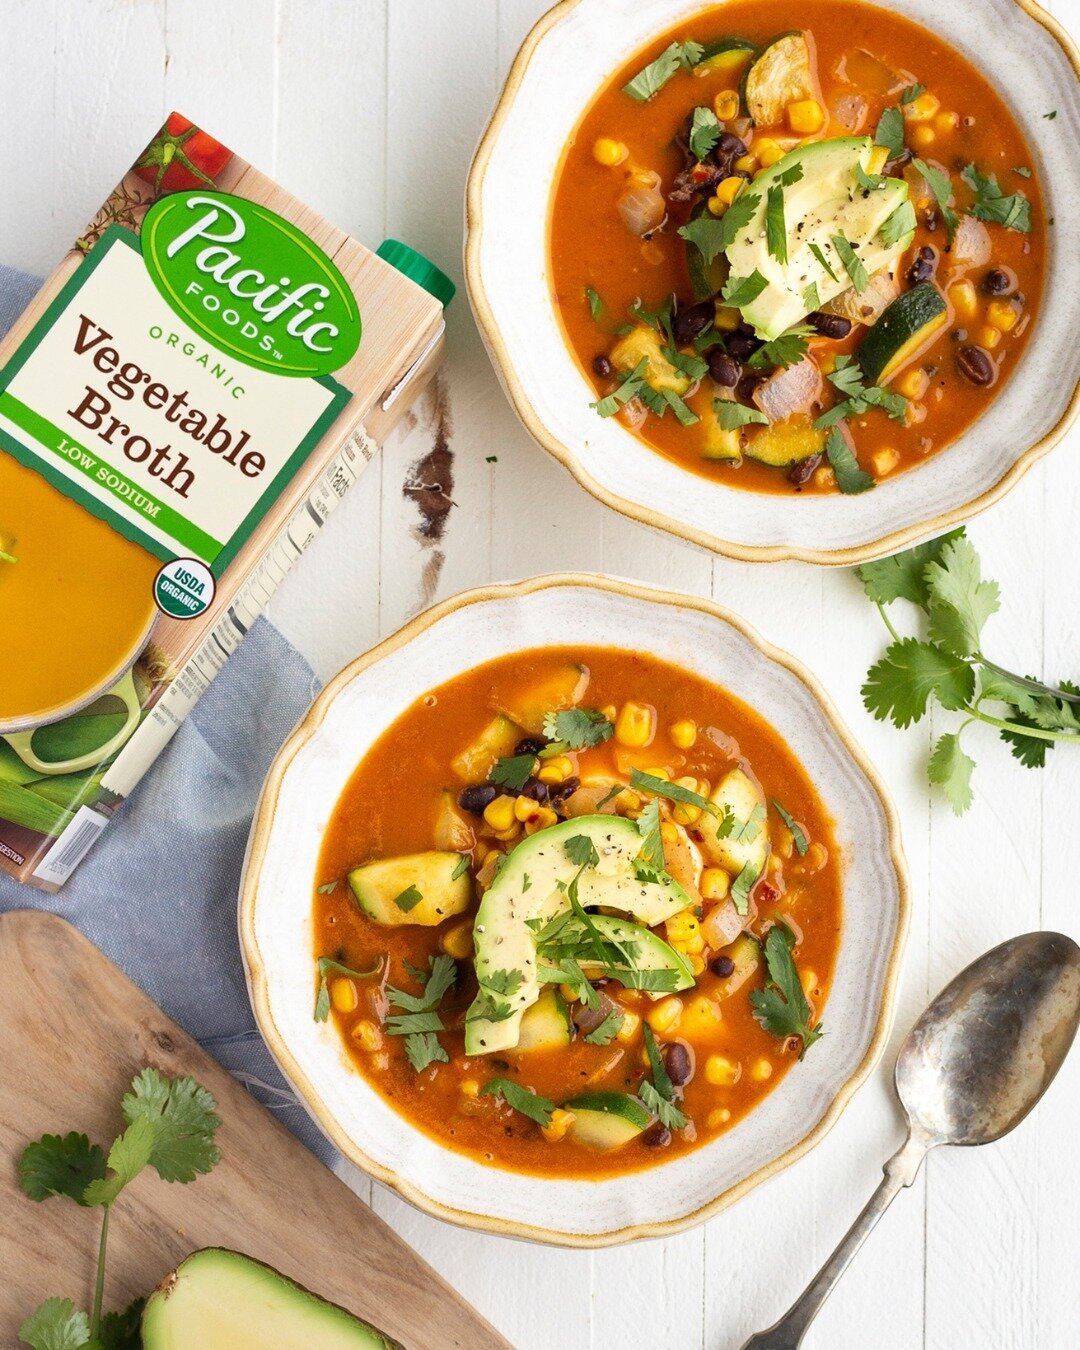 Stay hydrated and nourished when the air gets dry with @pacificfoods Organic Broths, a hydrating base for your soups and stews with all the electrolytes and nutrients you need! 

📸: @pacificfoods